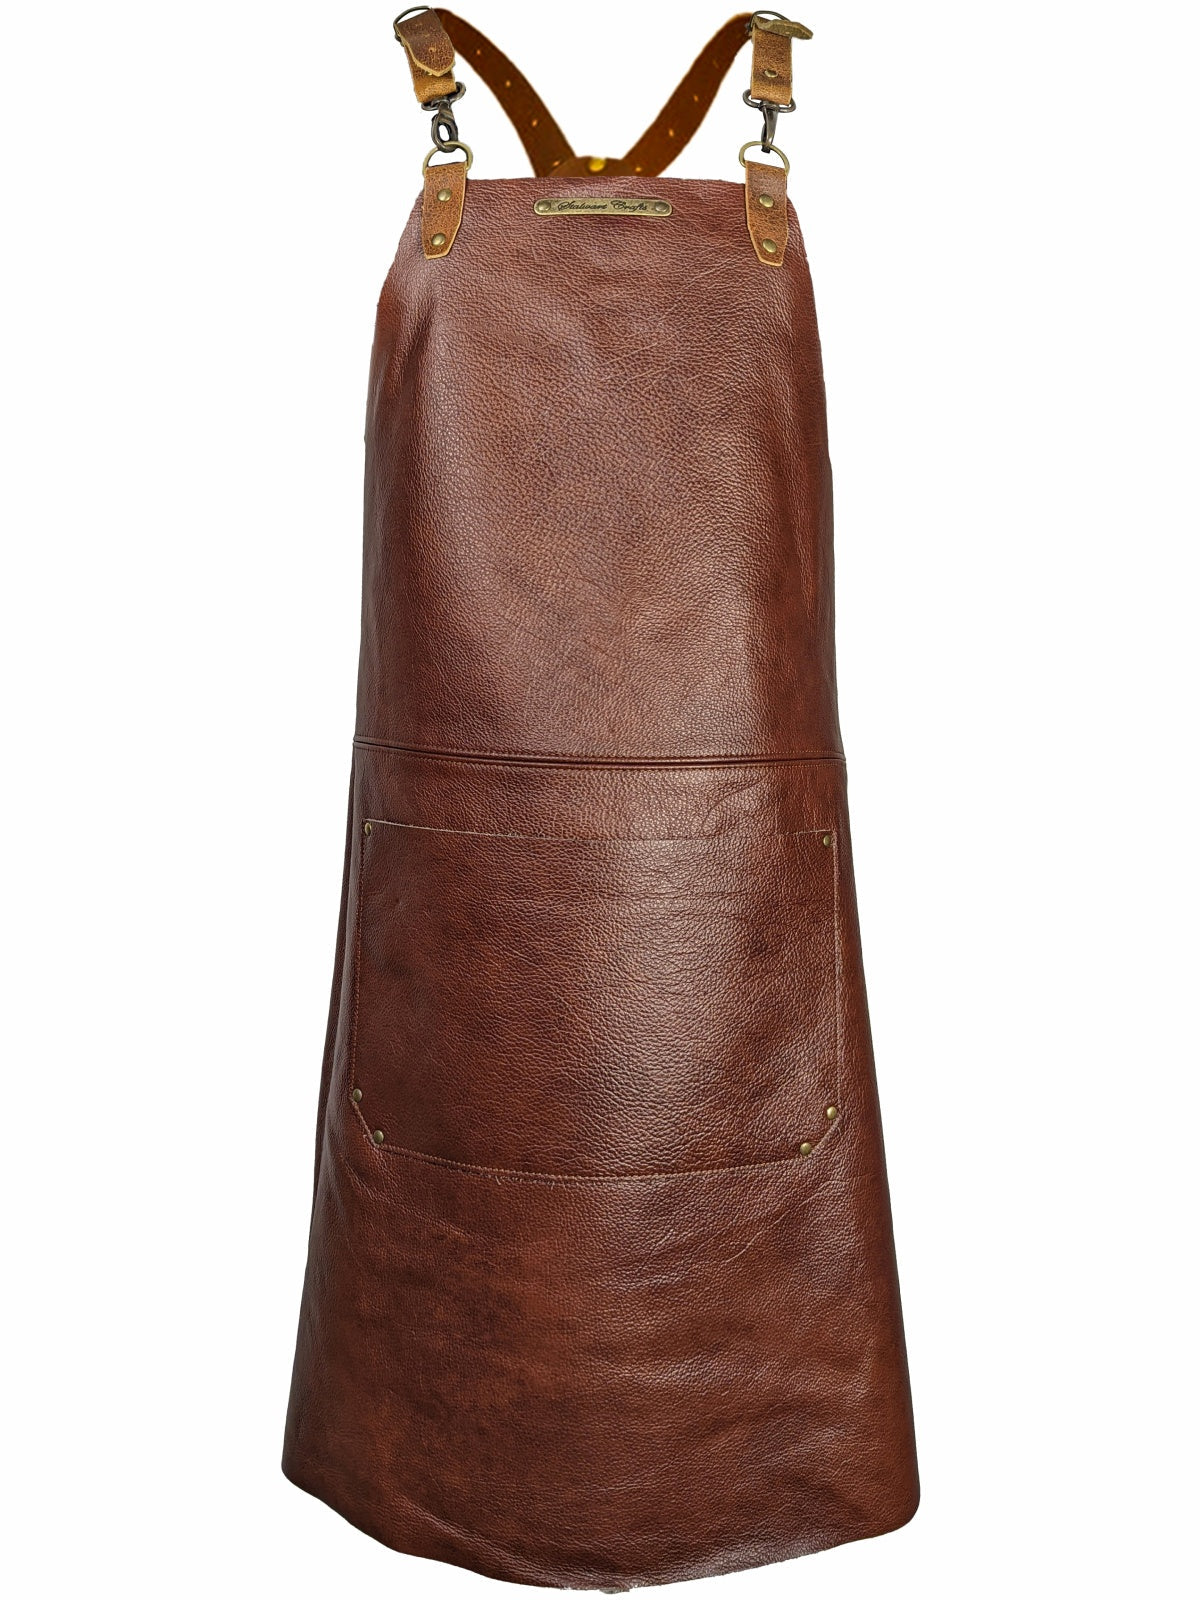 Leather Apron Cross Strap Deluxe Brown